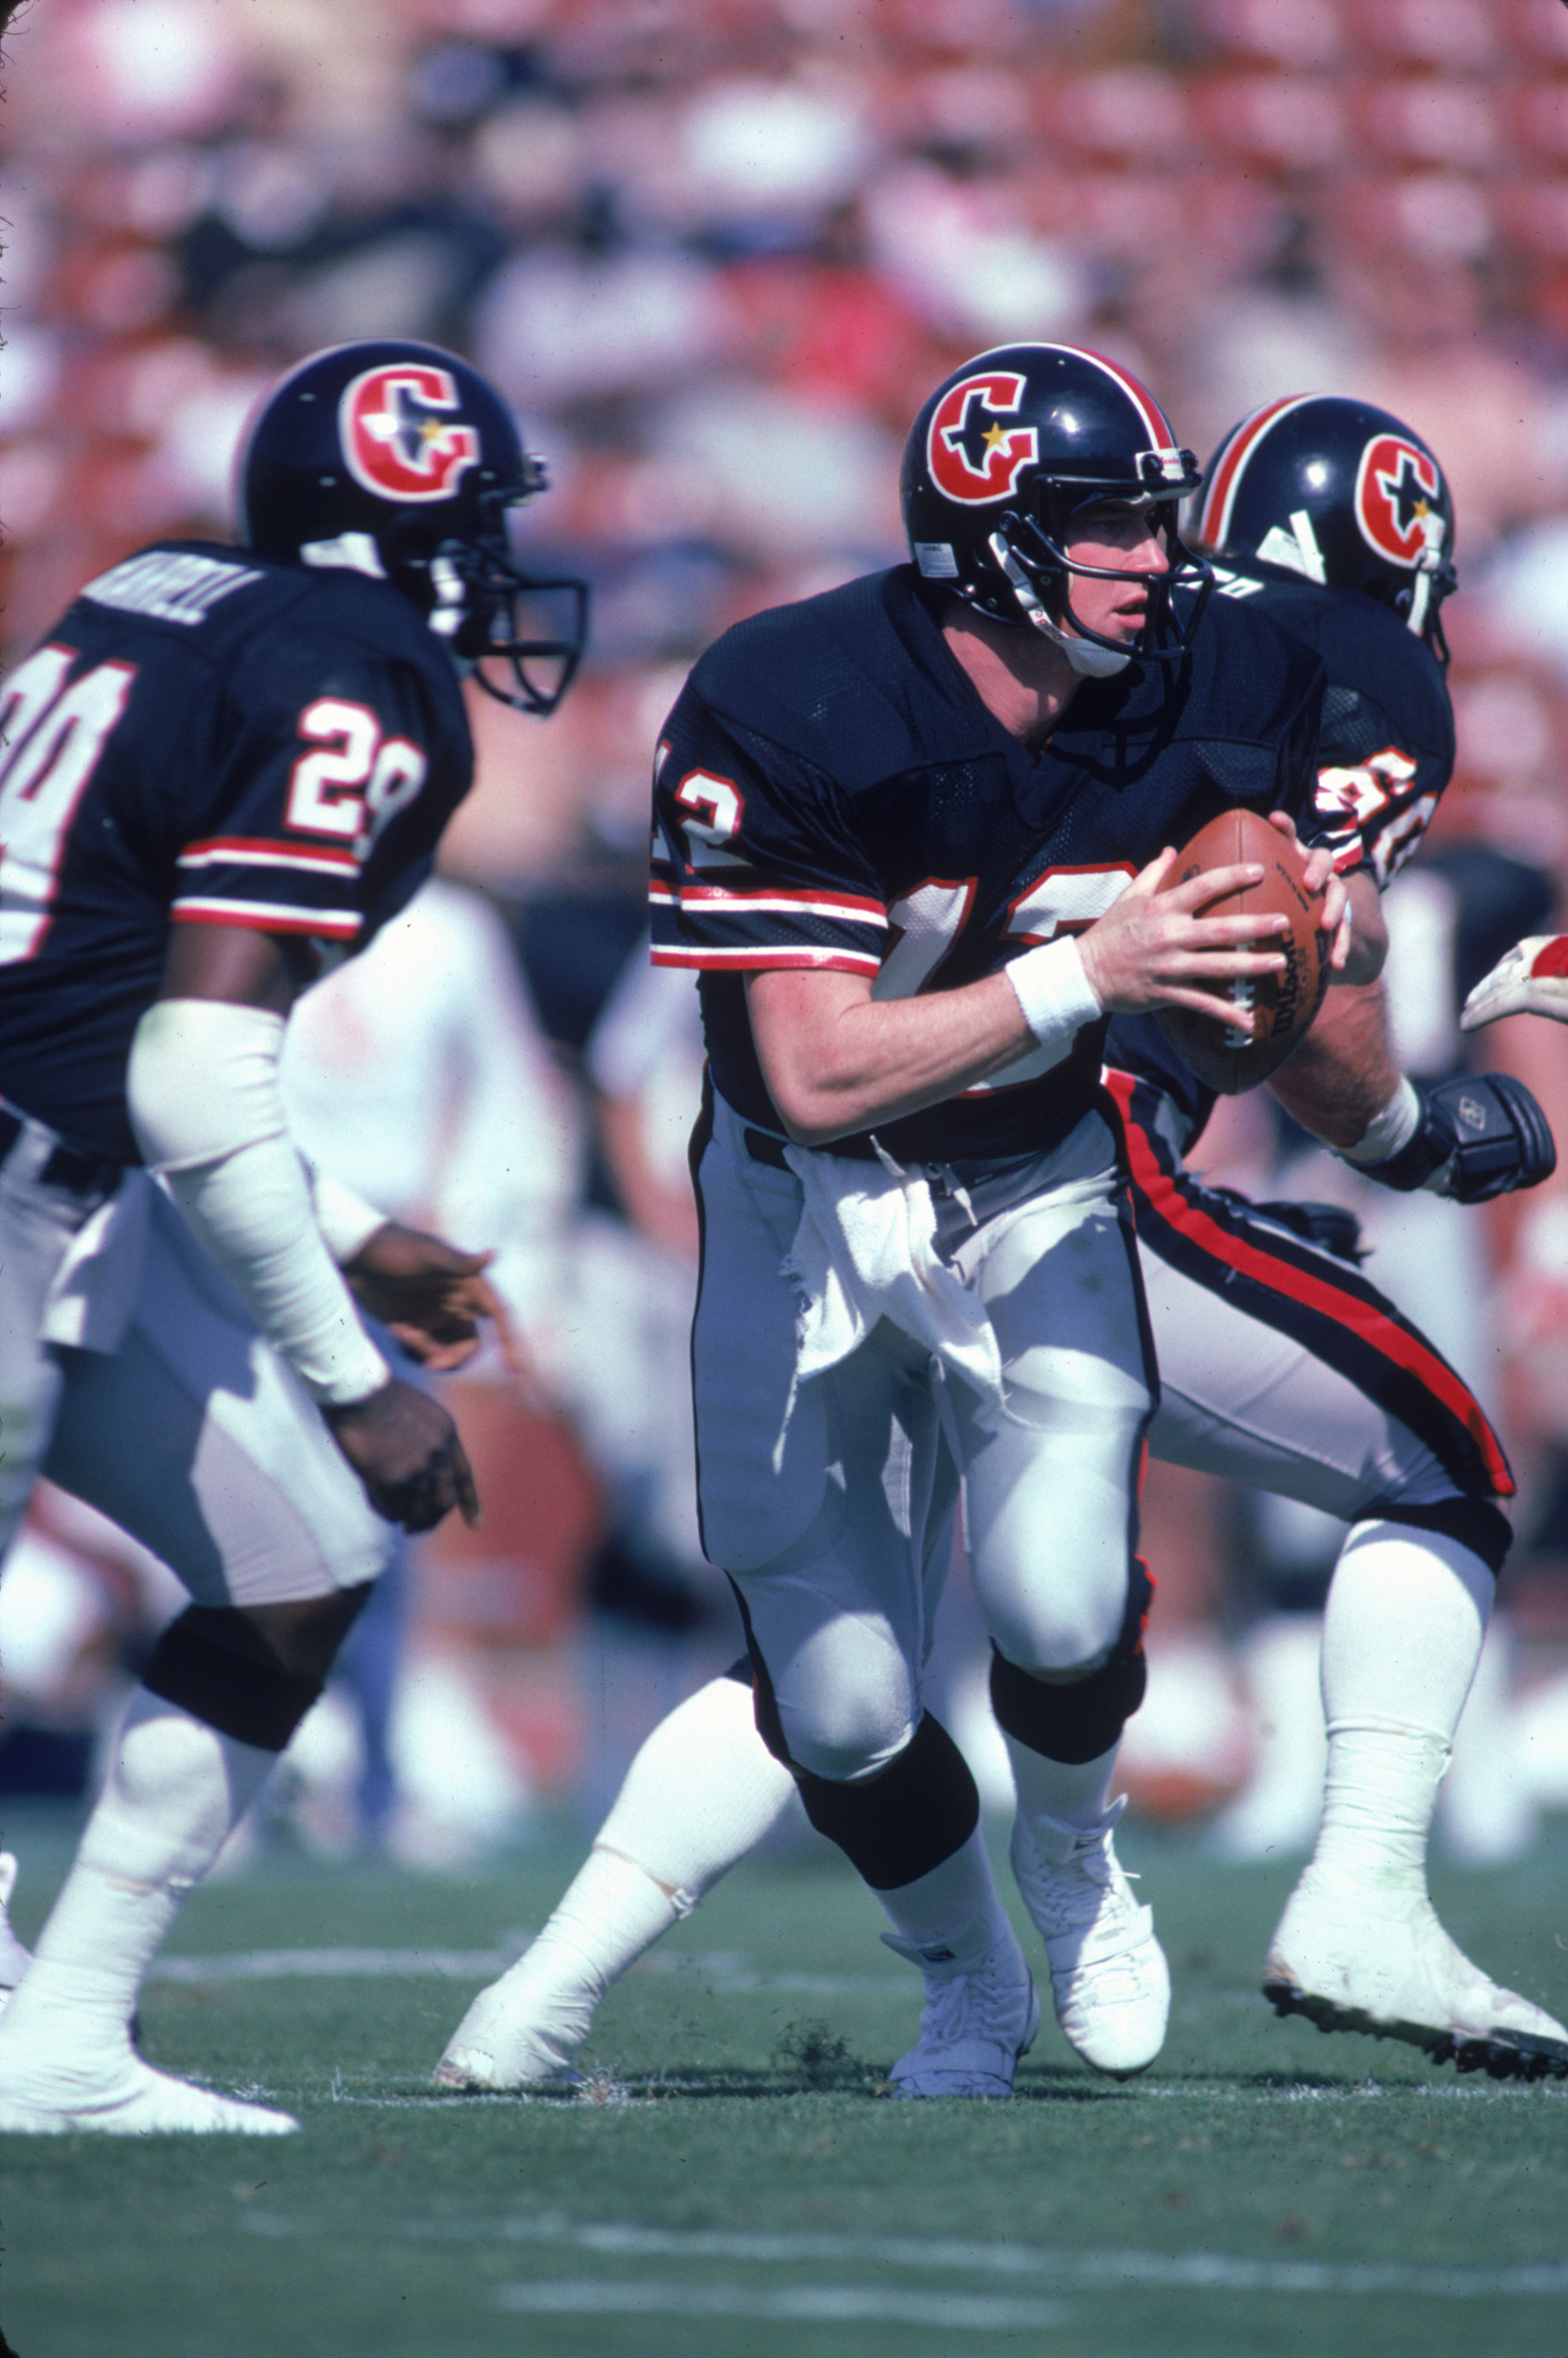 FEBRUARY 1985: Quarterback Jim Kelly #12 of the Houston Gamblers scrambles during a 1985 season USFL game. Stephen Dunn/Getty Images